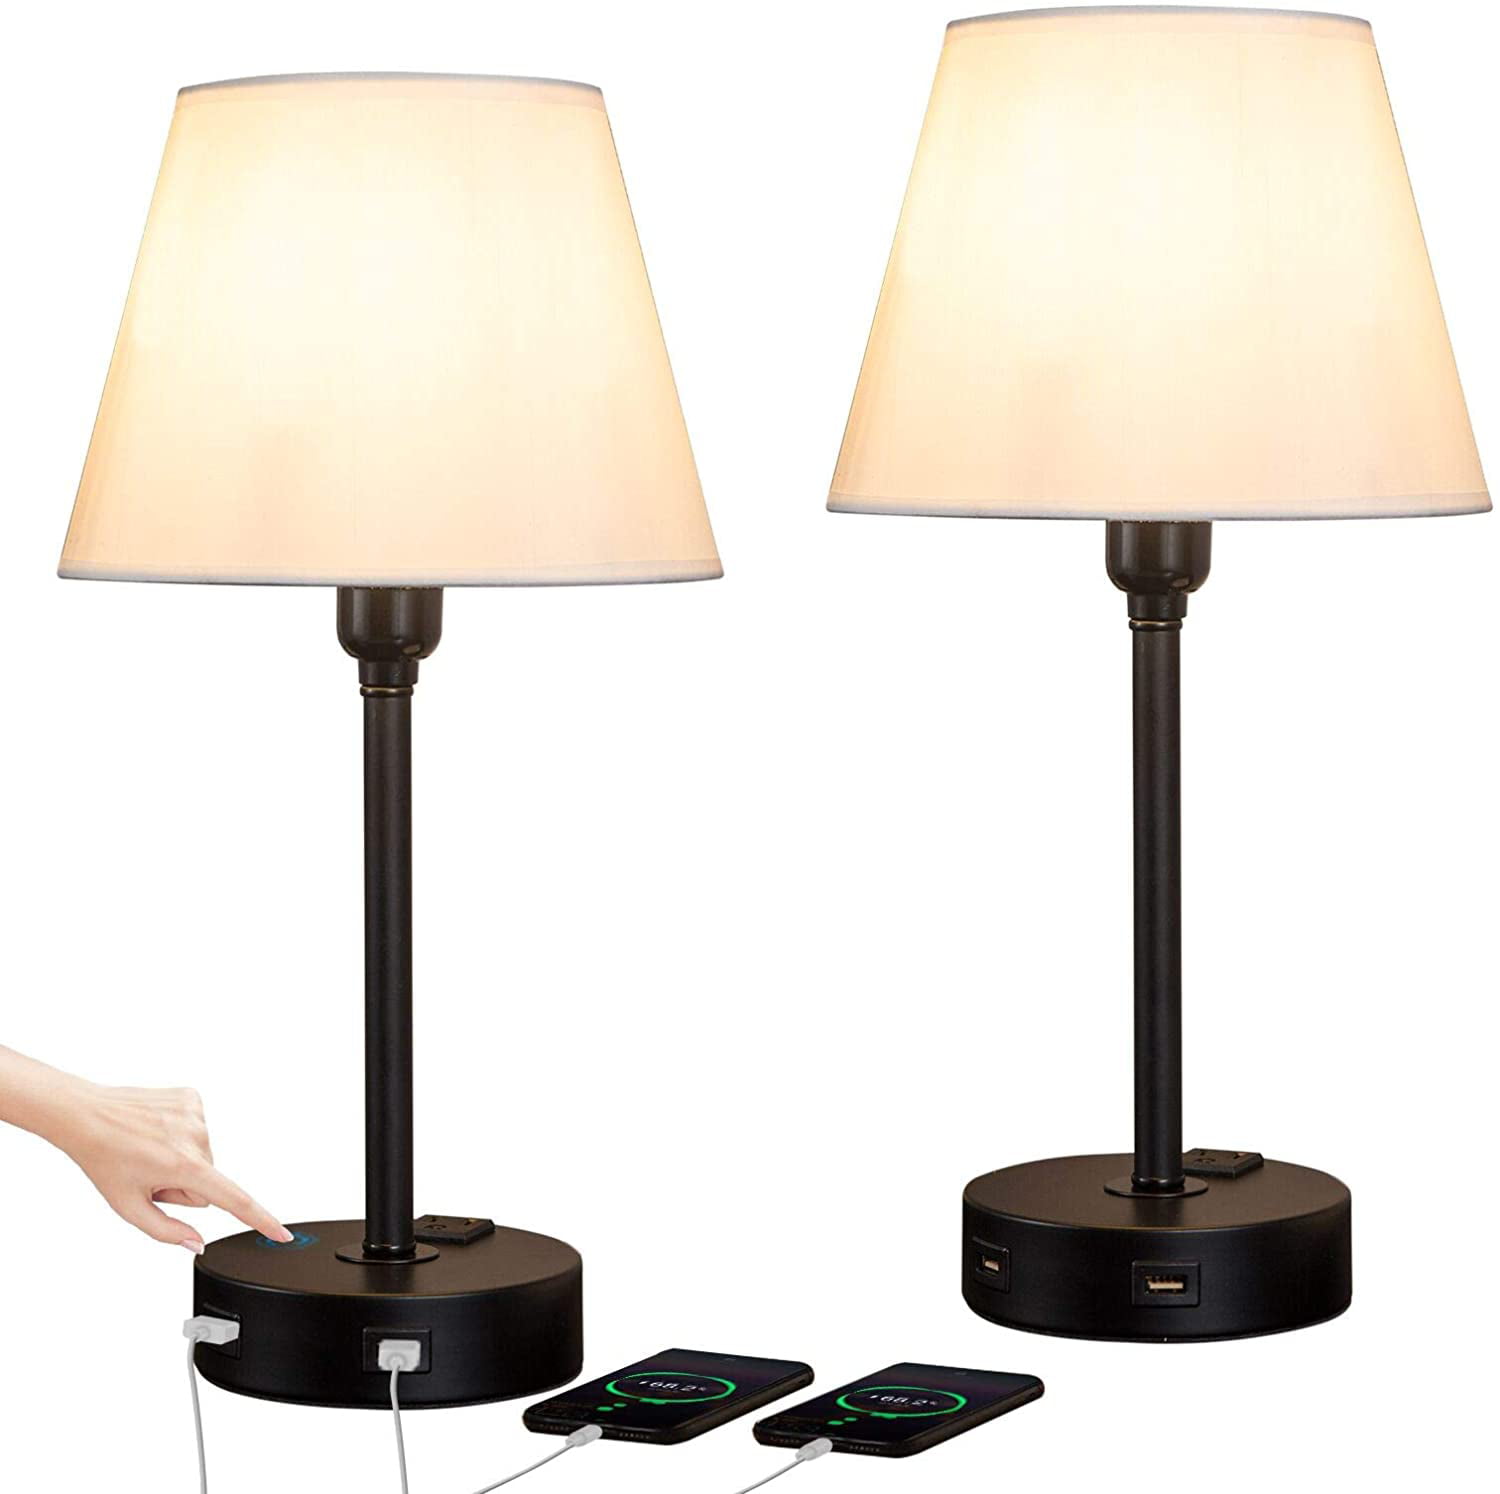 Zeefo Touch Control Table Lamp Built In, White Touch Table Lamp